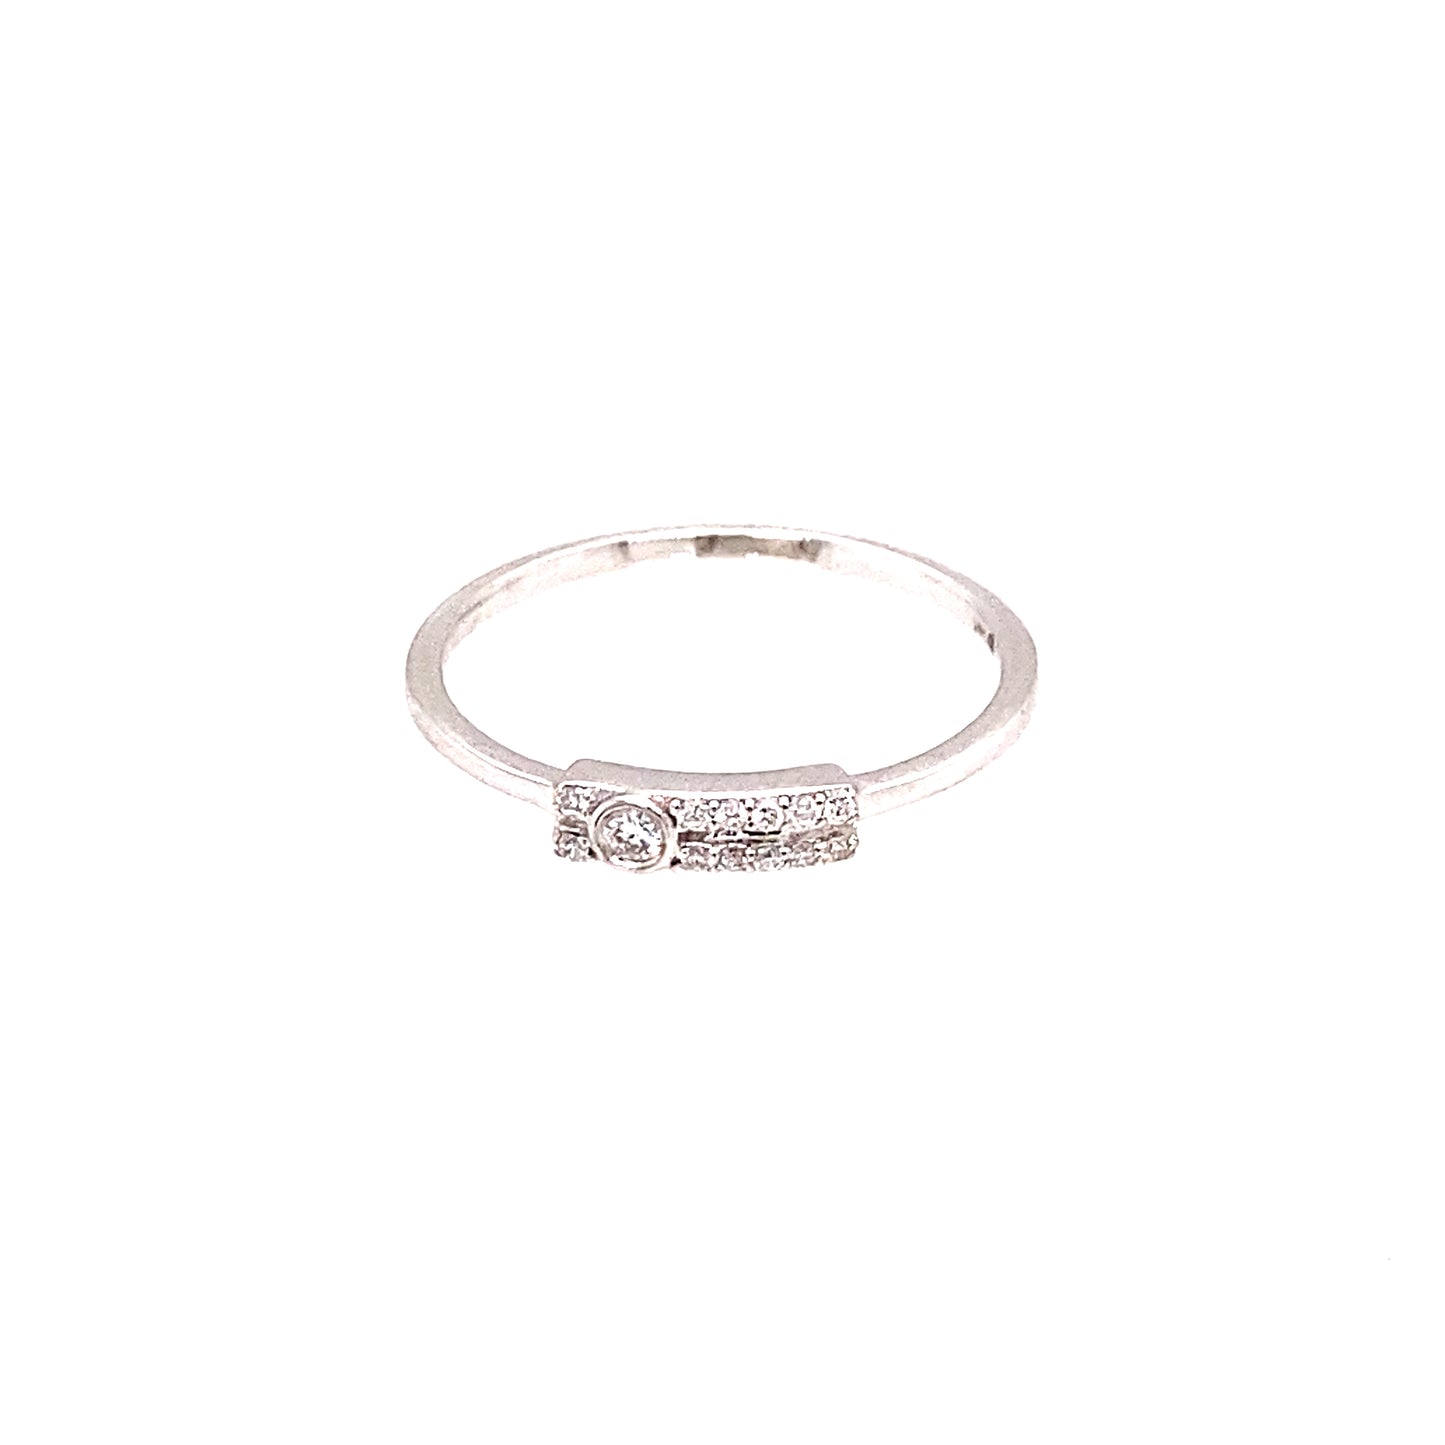 14K White Gold Diamond Wedding or Stackable Band